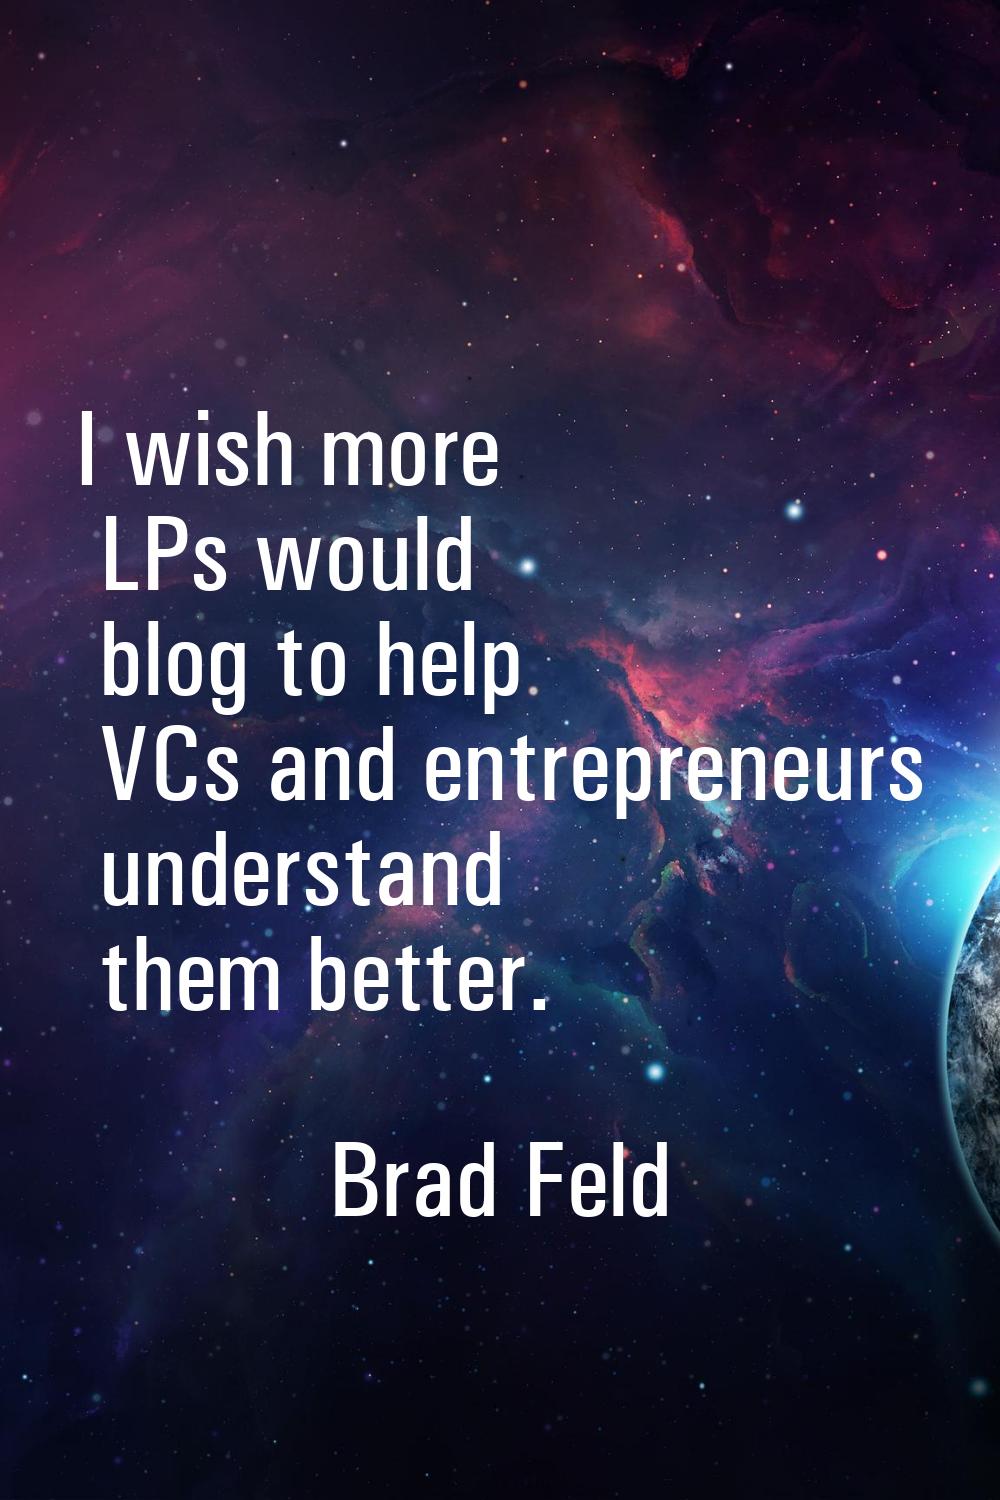 I wish more LPs would blog to help VCs and entrepreneurs understand them better.